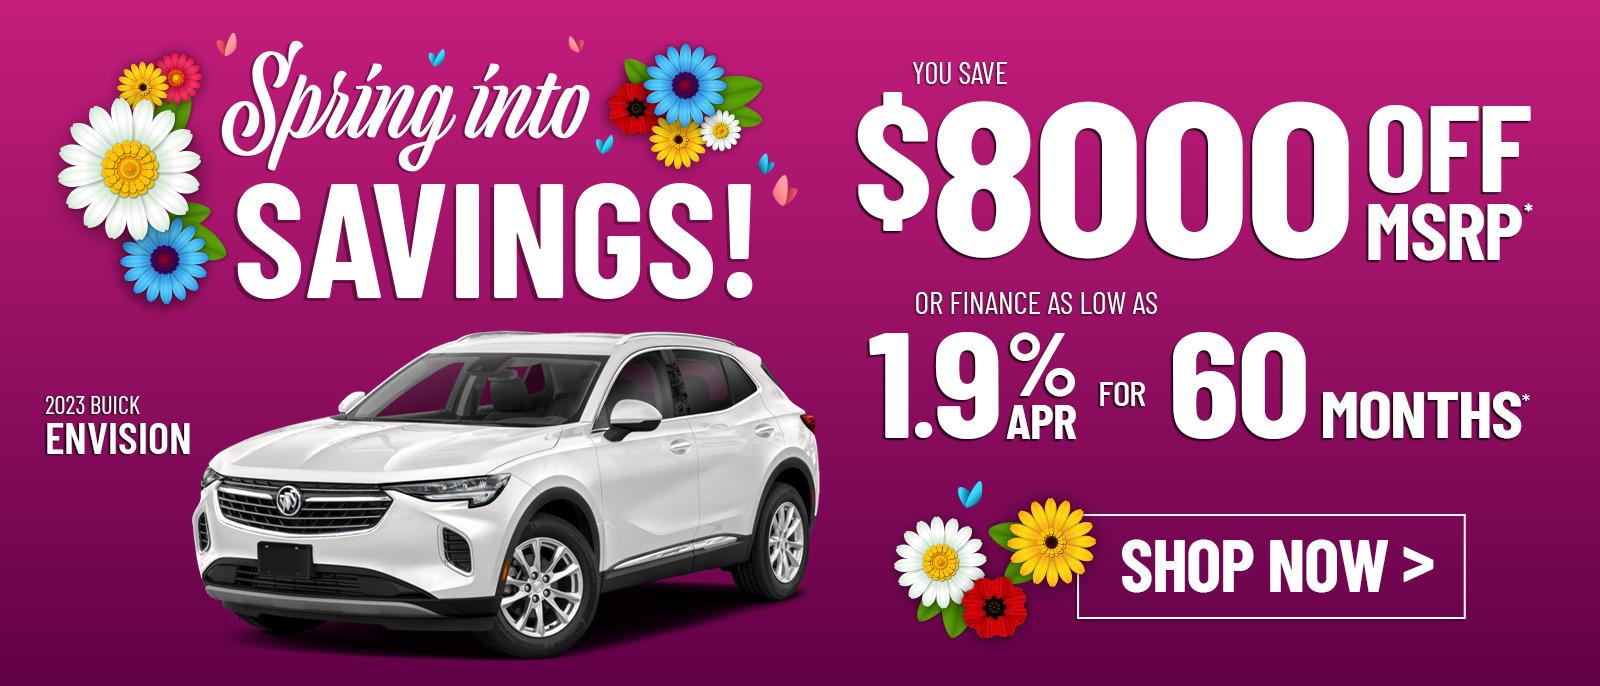 2023 Buick Envision - You Save $8000 Off MSRP; Financing as low as 1.9% for 60 months